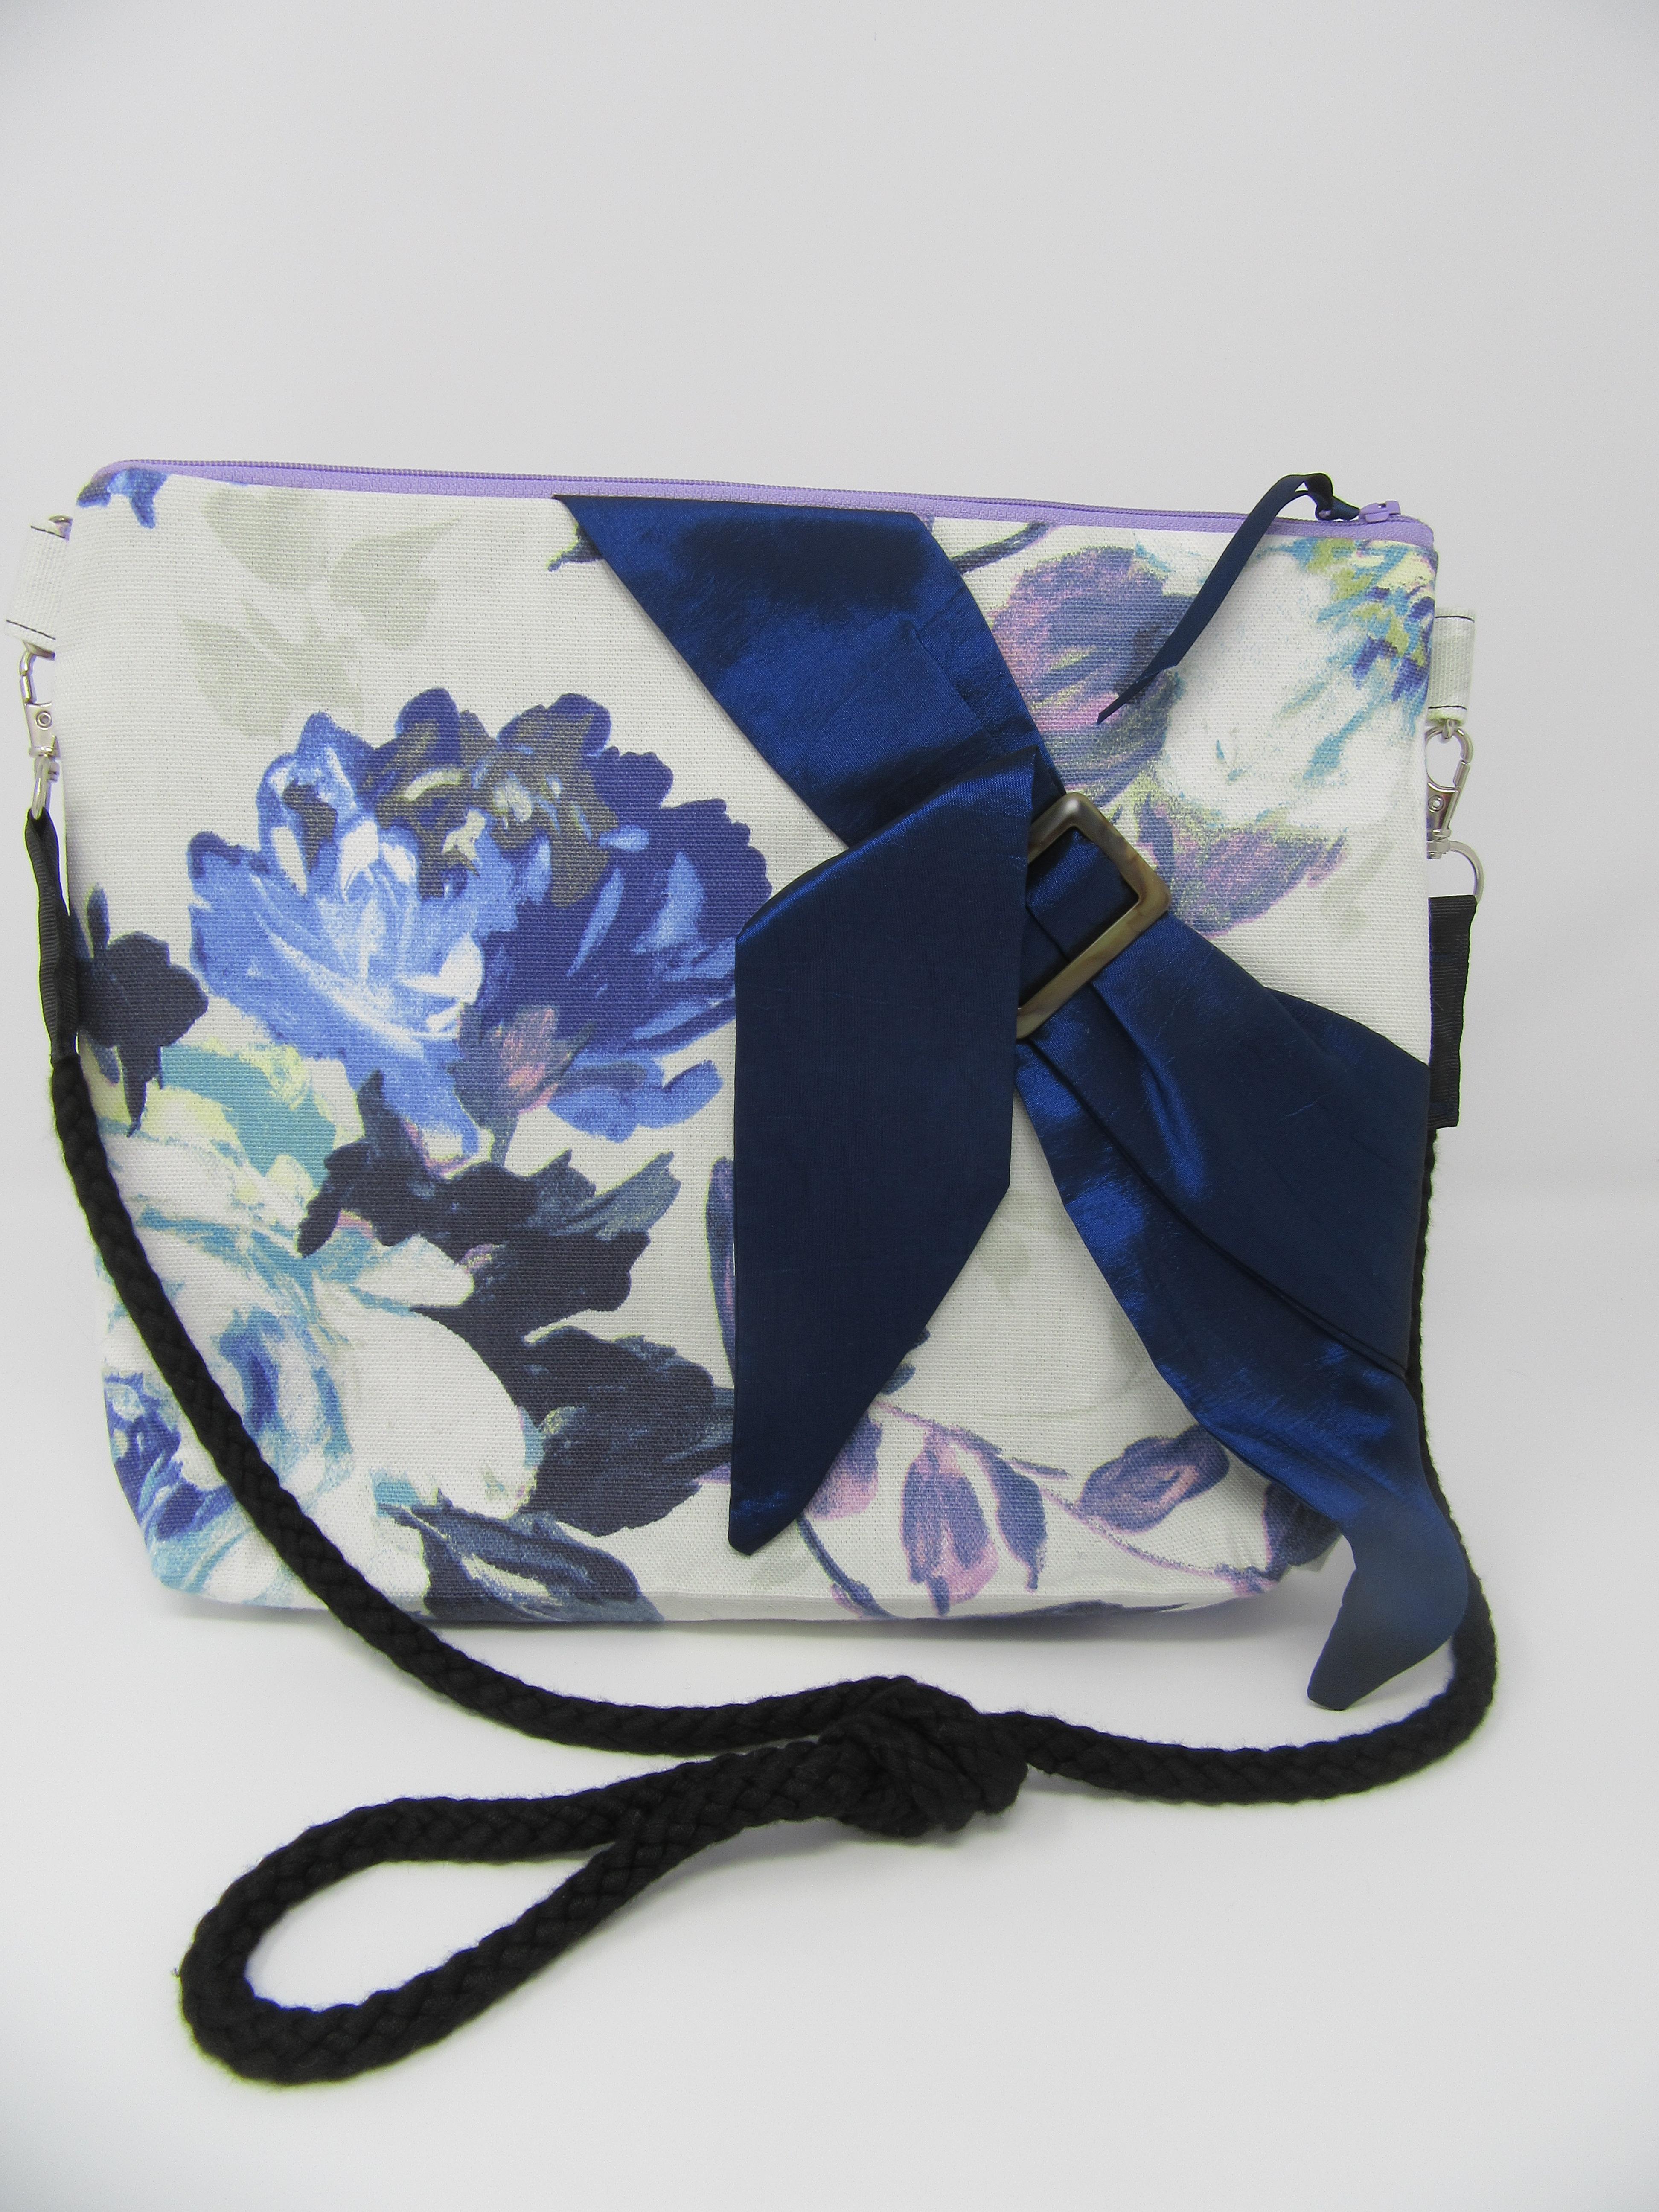 Blue rose bag with large bow